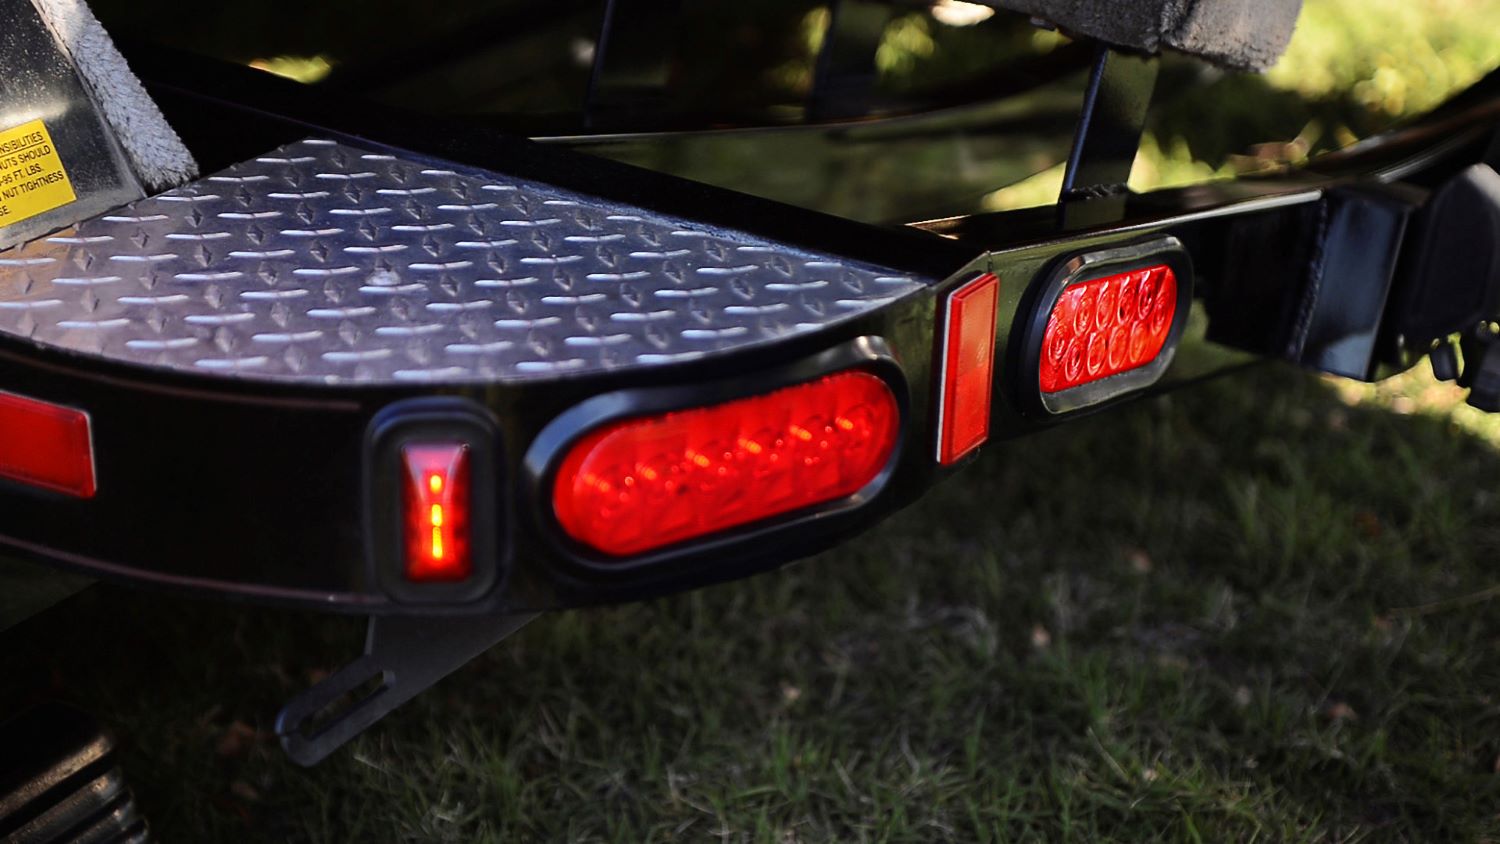 LED taillights on boat trailer